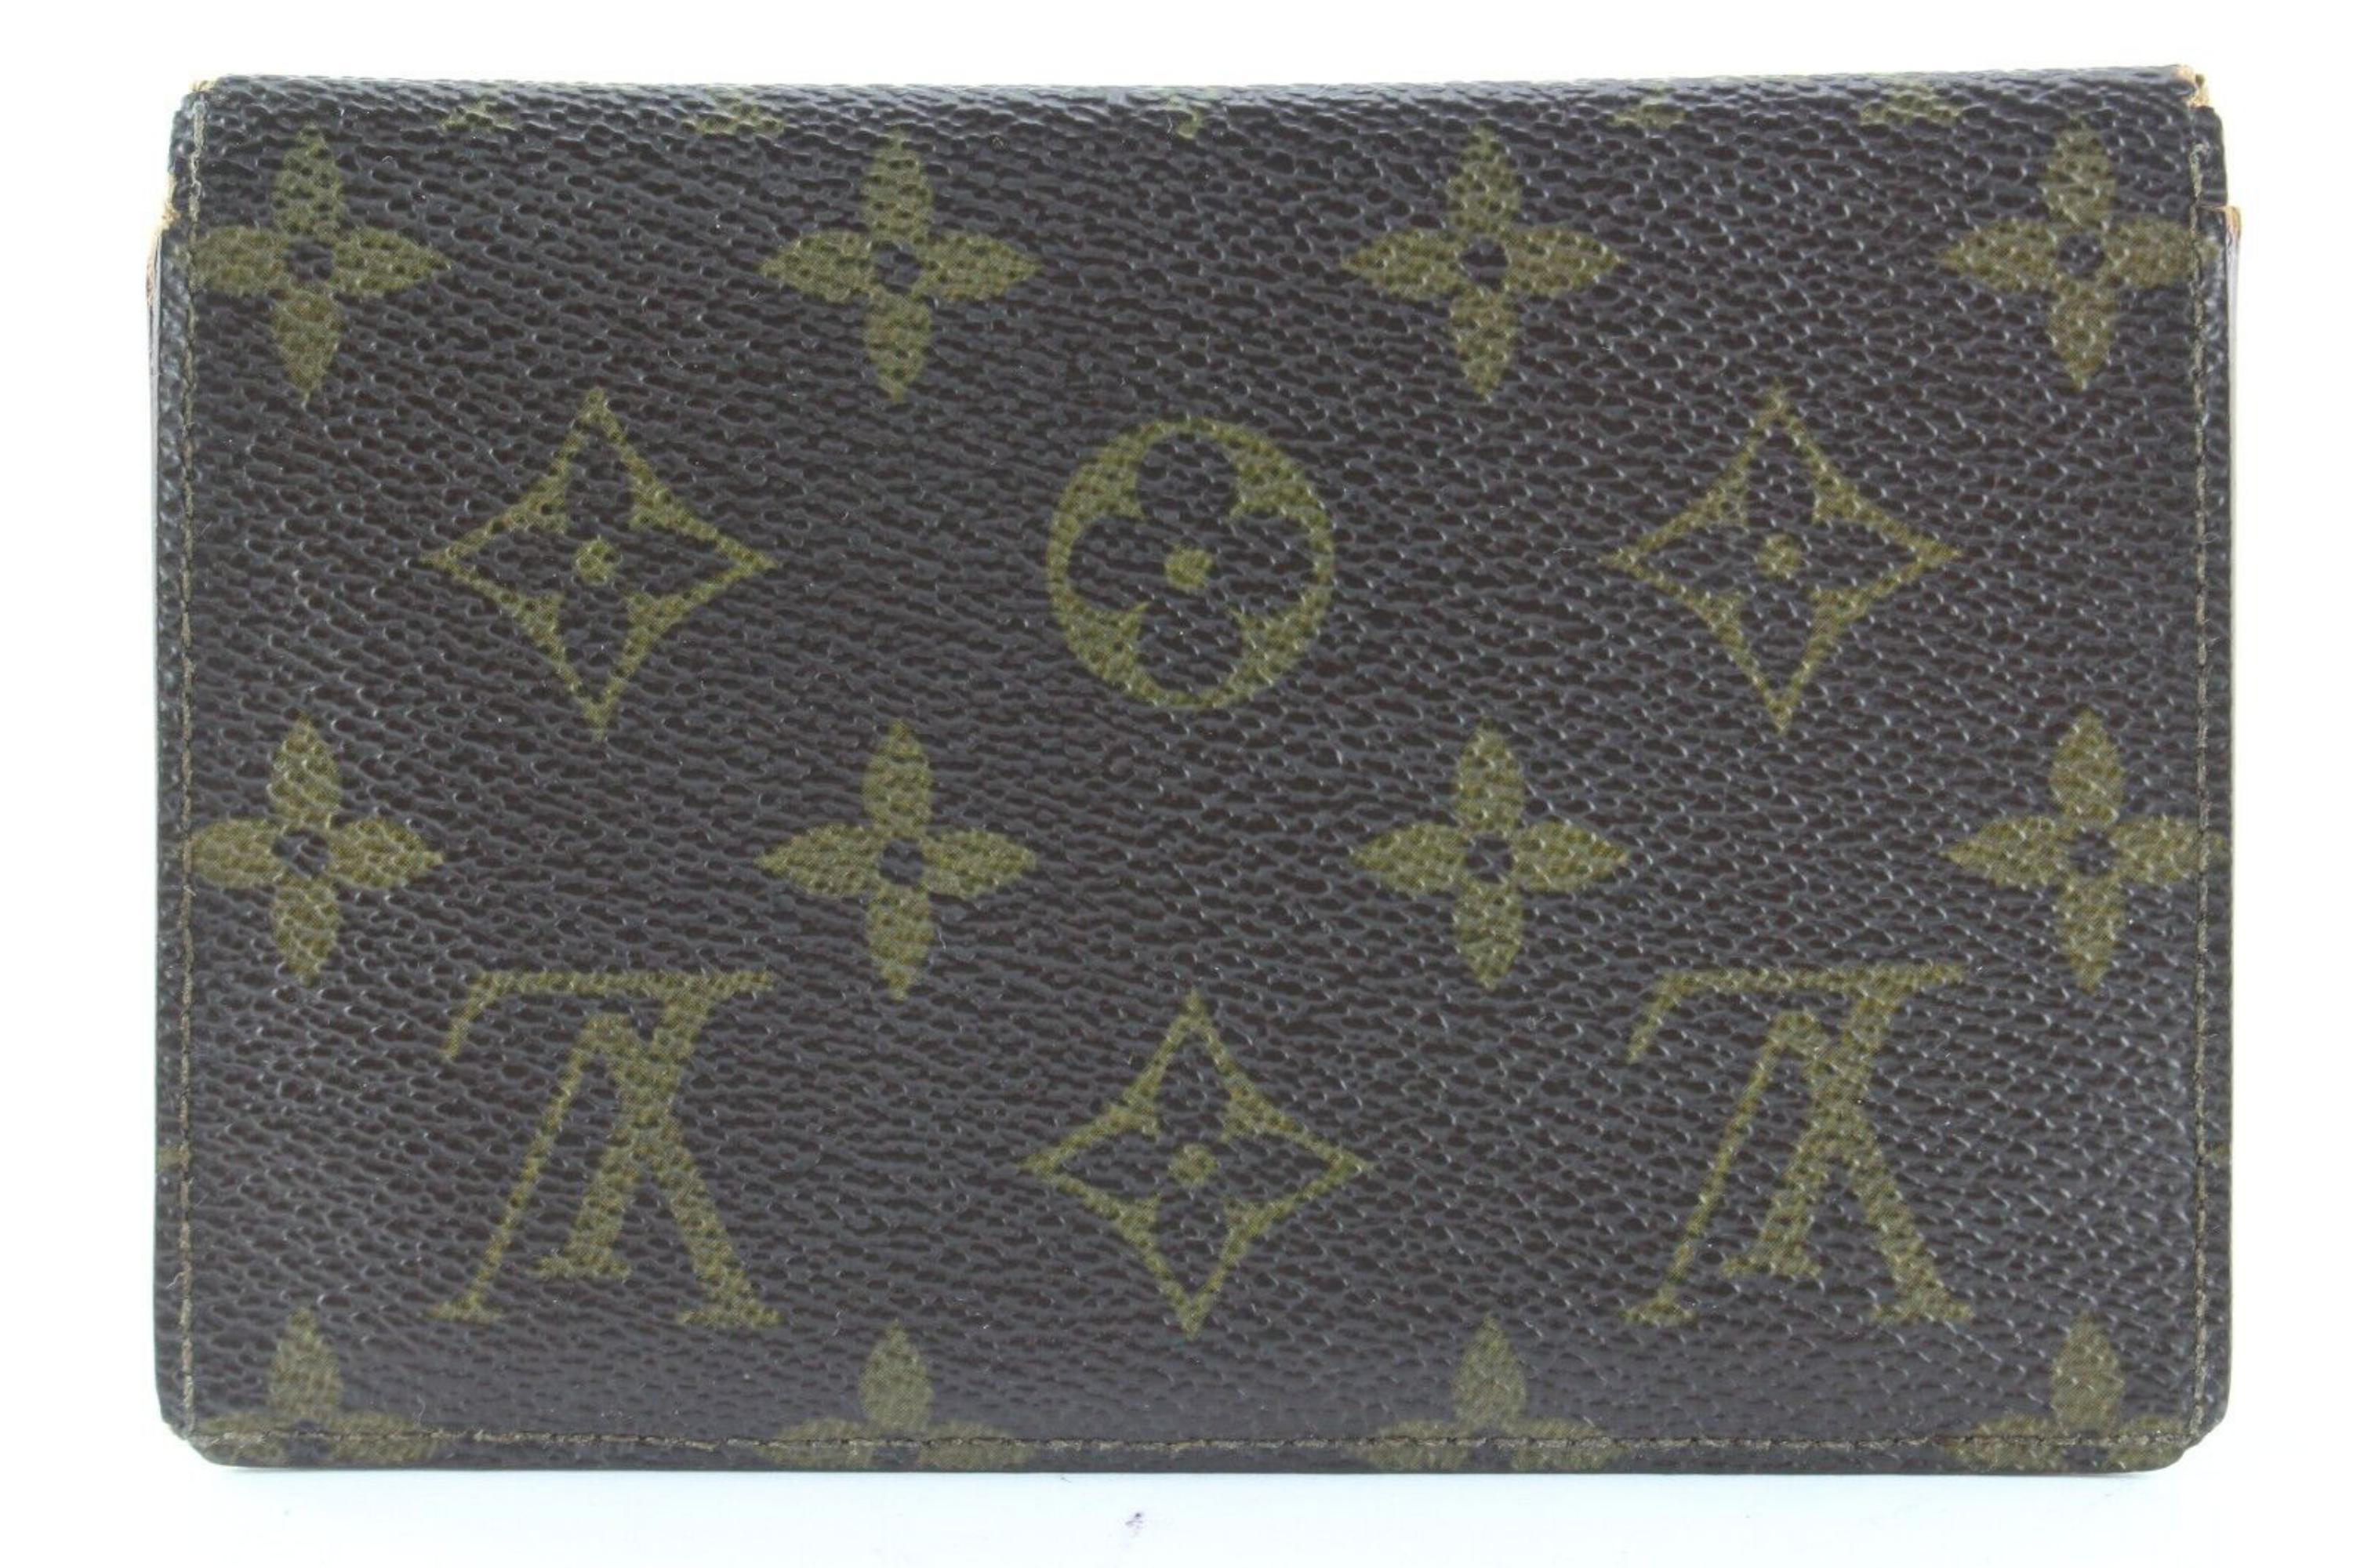 Women's Louis Vuitton Extremely Rare Card Holder Envelope Pouch 3LV0509